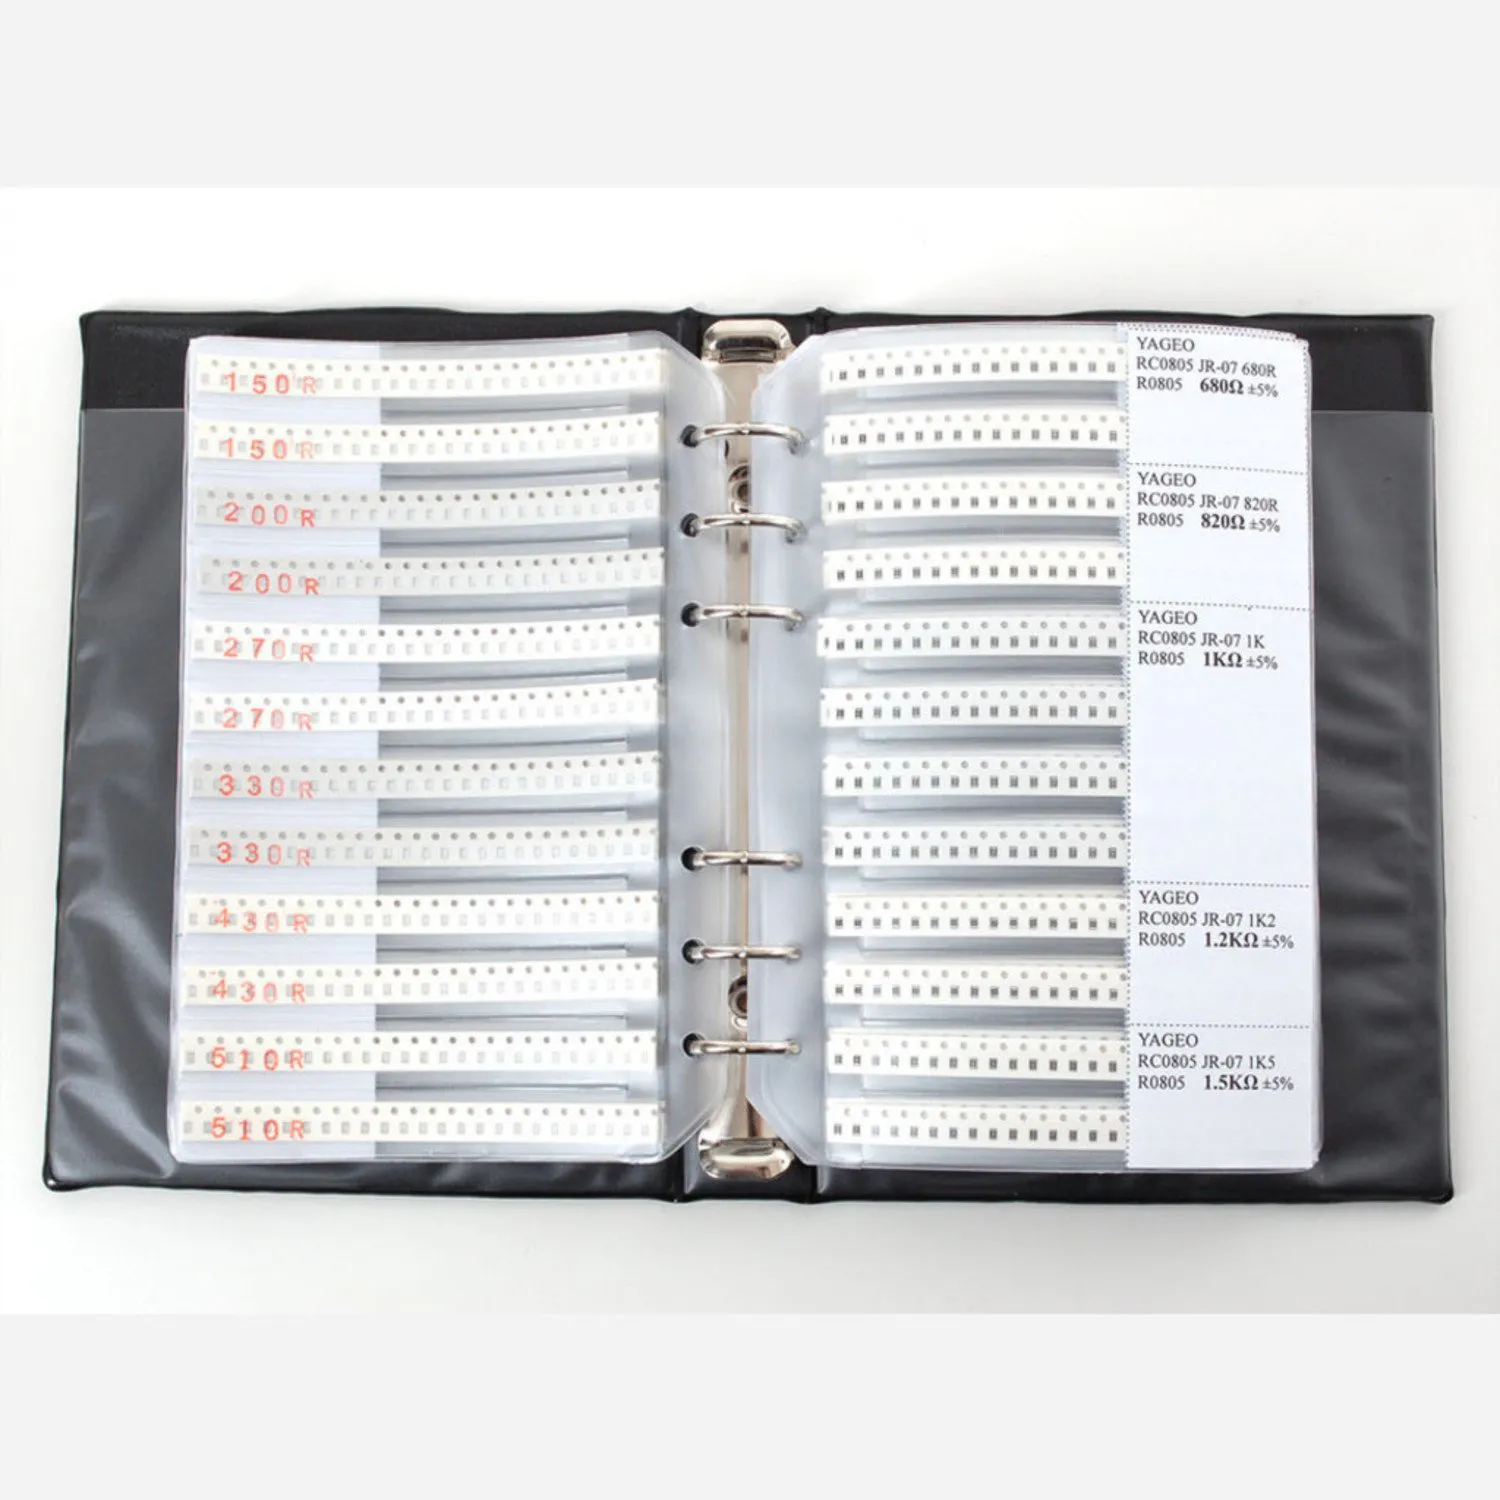 Photo of SMT/SMD 0805 Resistor and Capacitor Book - 3725 pieces